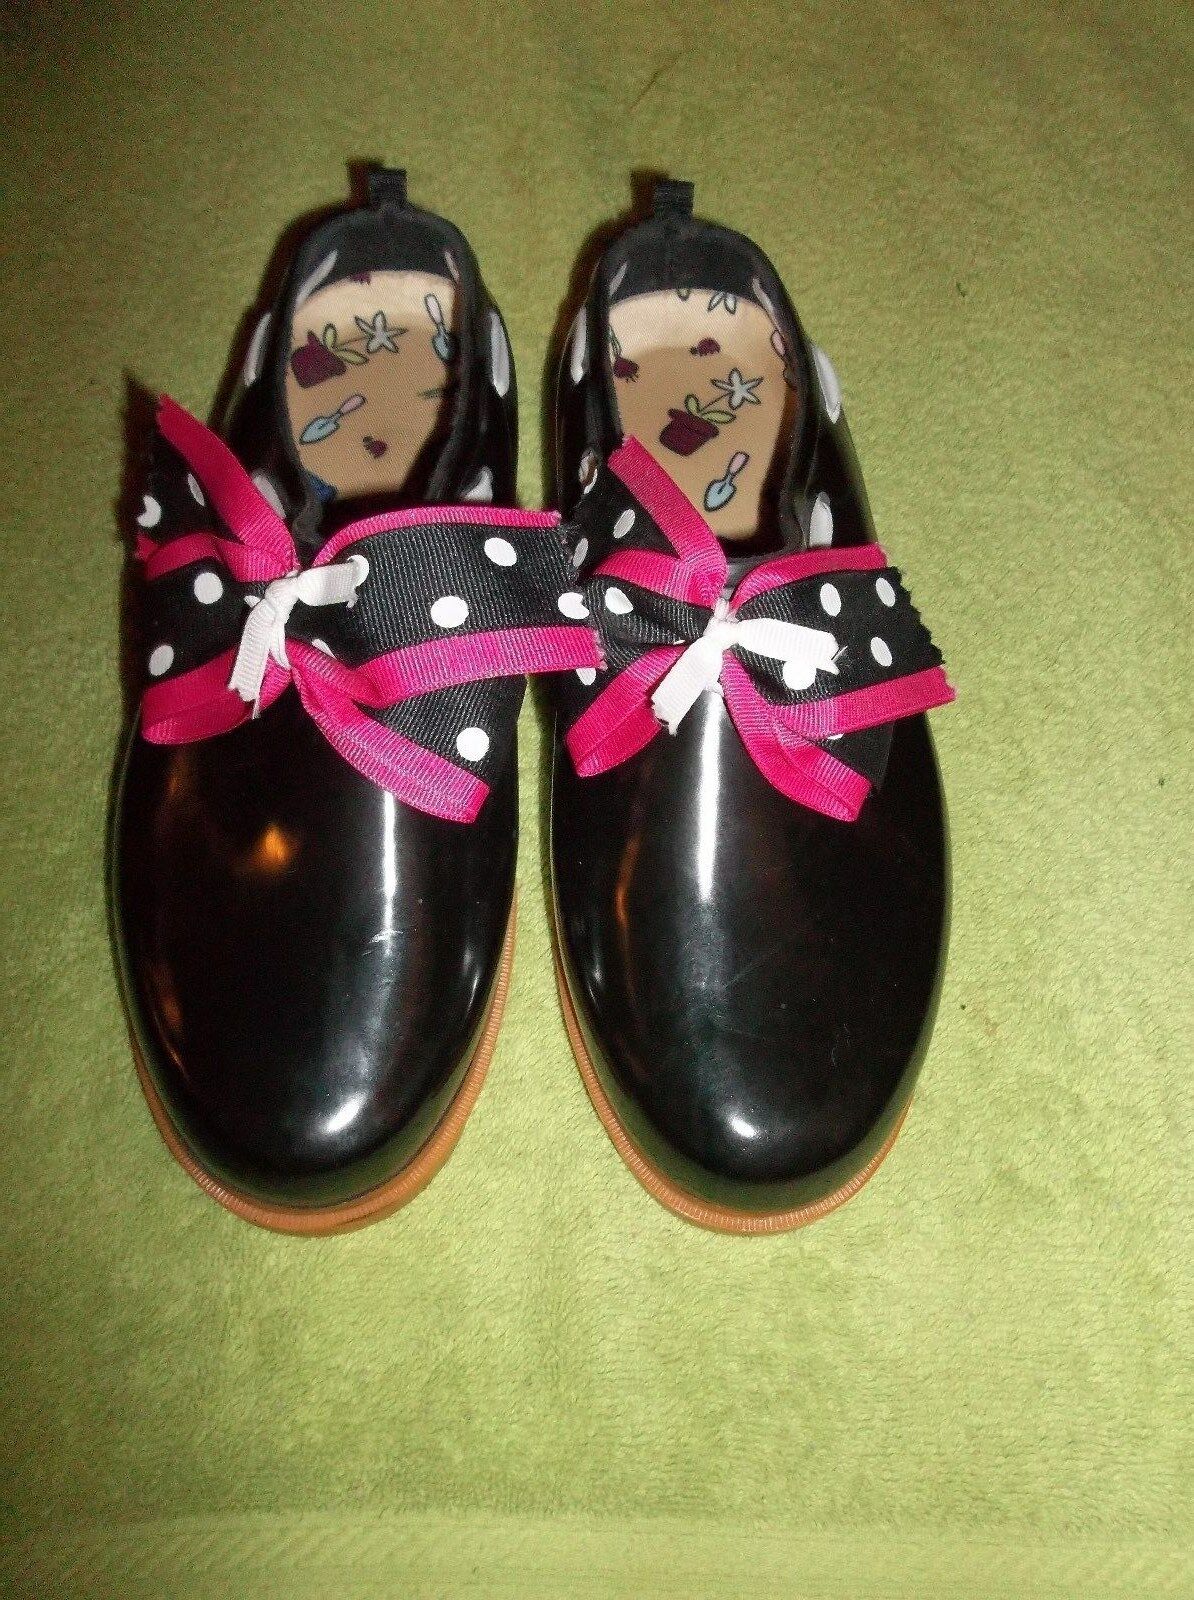 Women's Midwest Black With Bow Garden Clogs Us Size 8